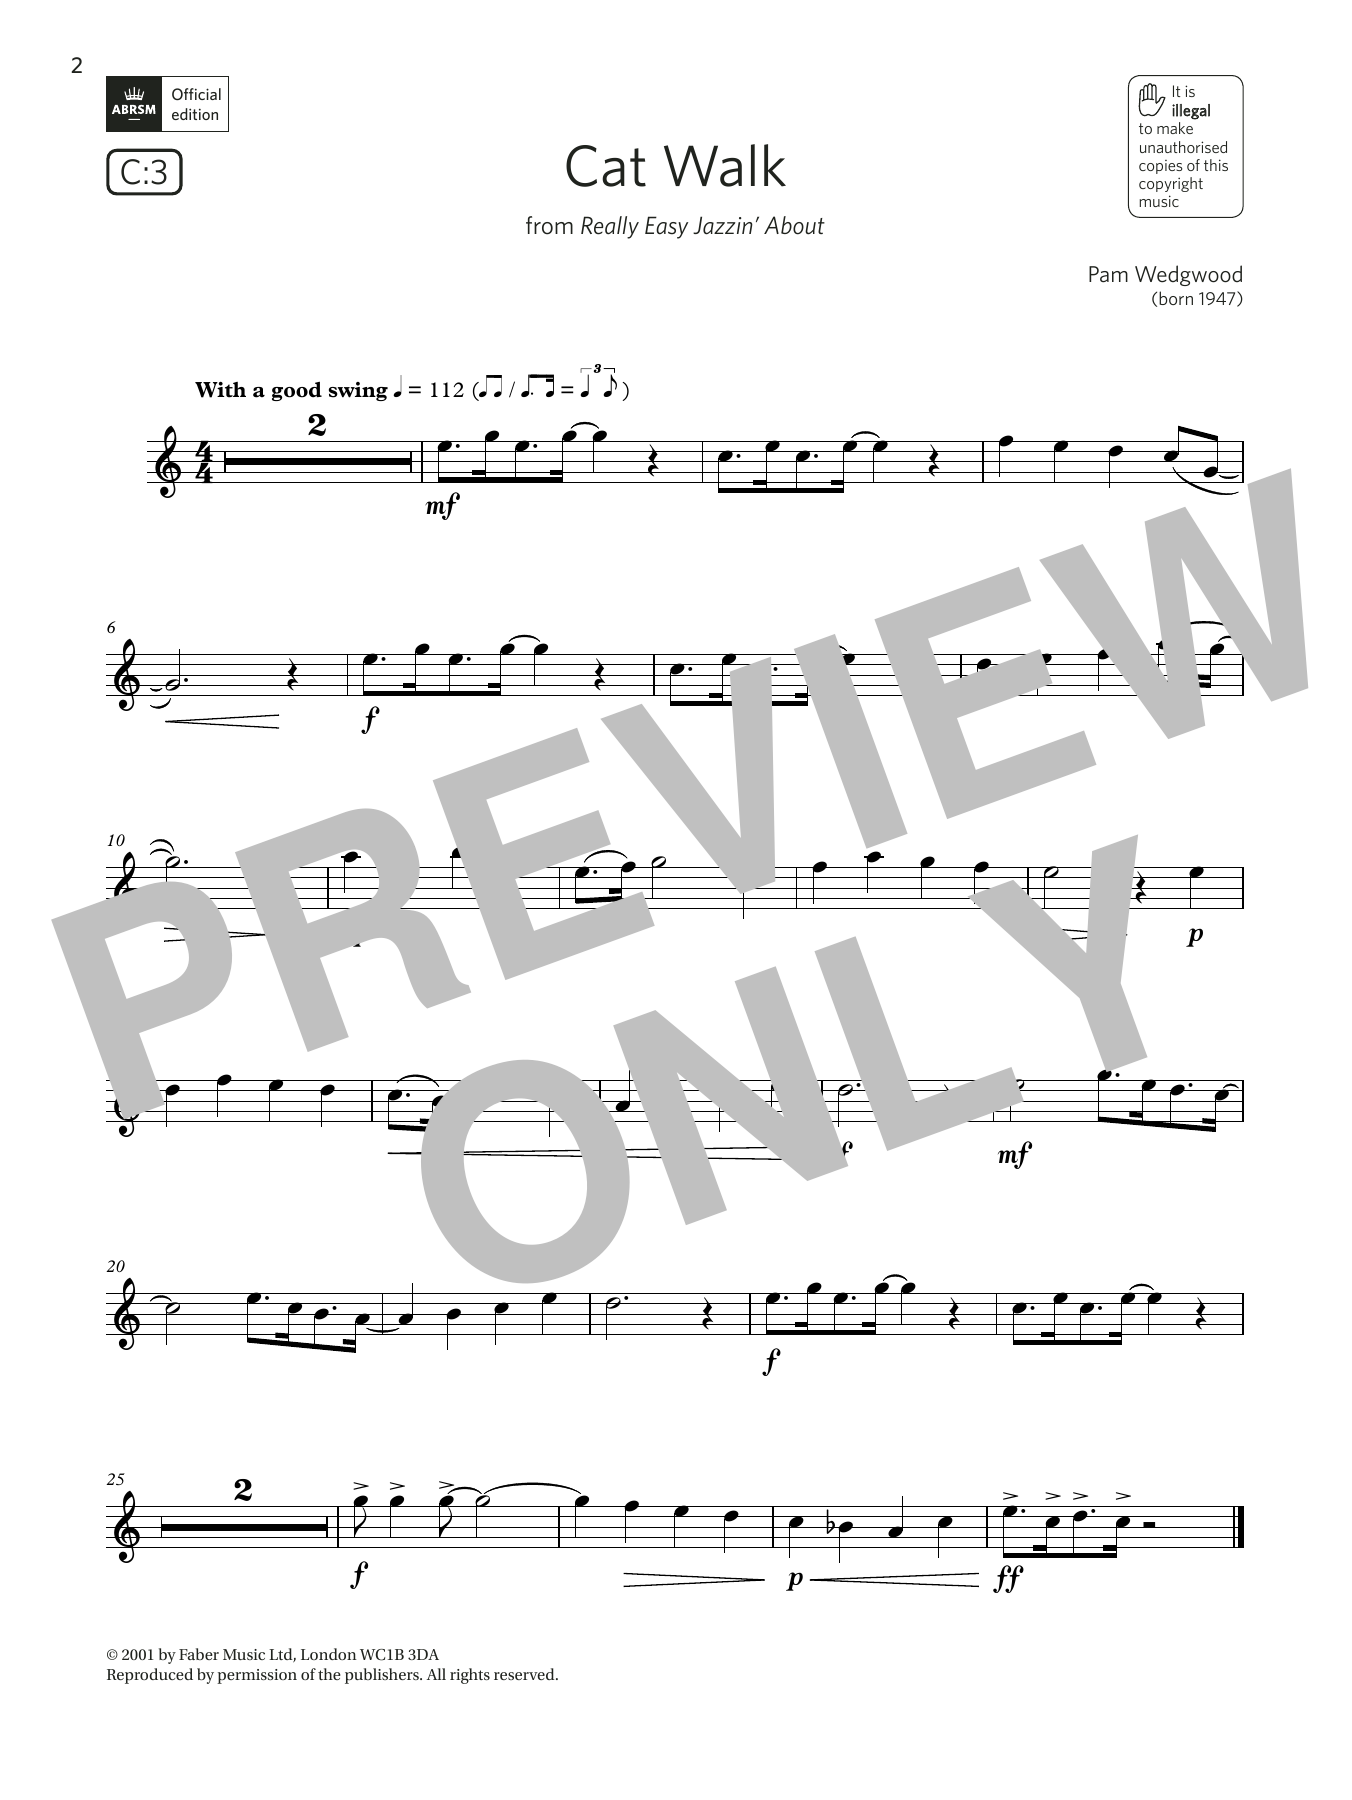 Download Pam Wedgwood Cat Walk (from Really Easy Jazzin' Abou Sheet Music